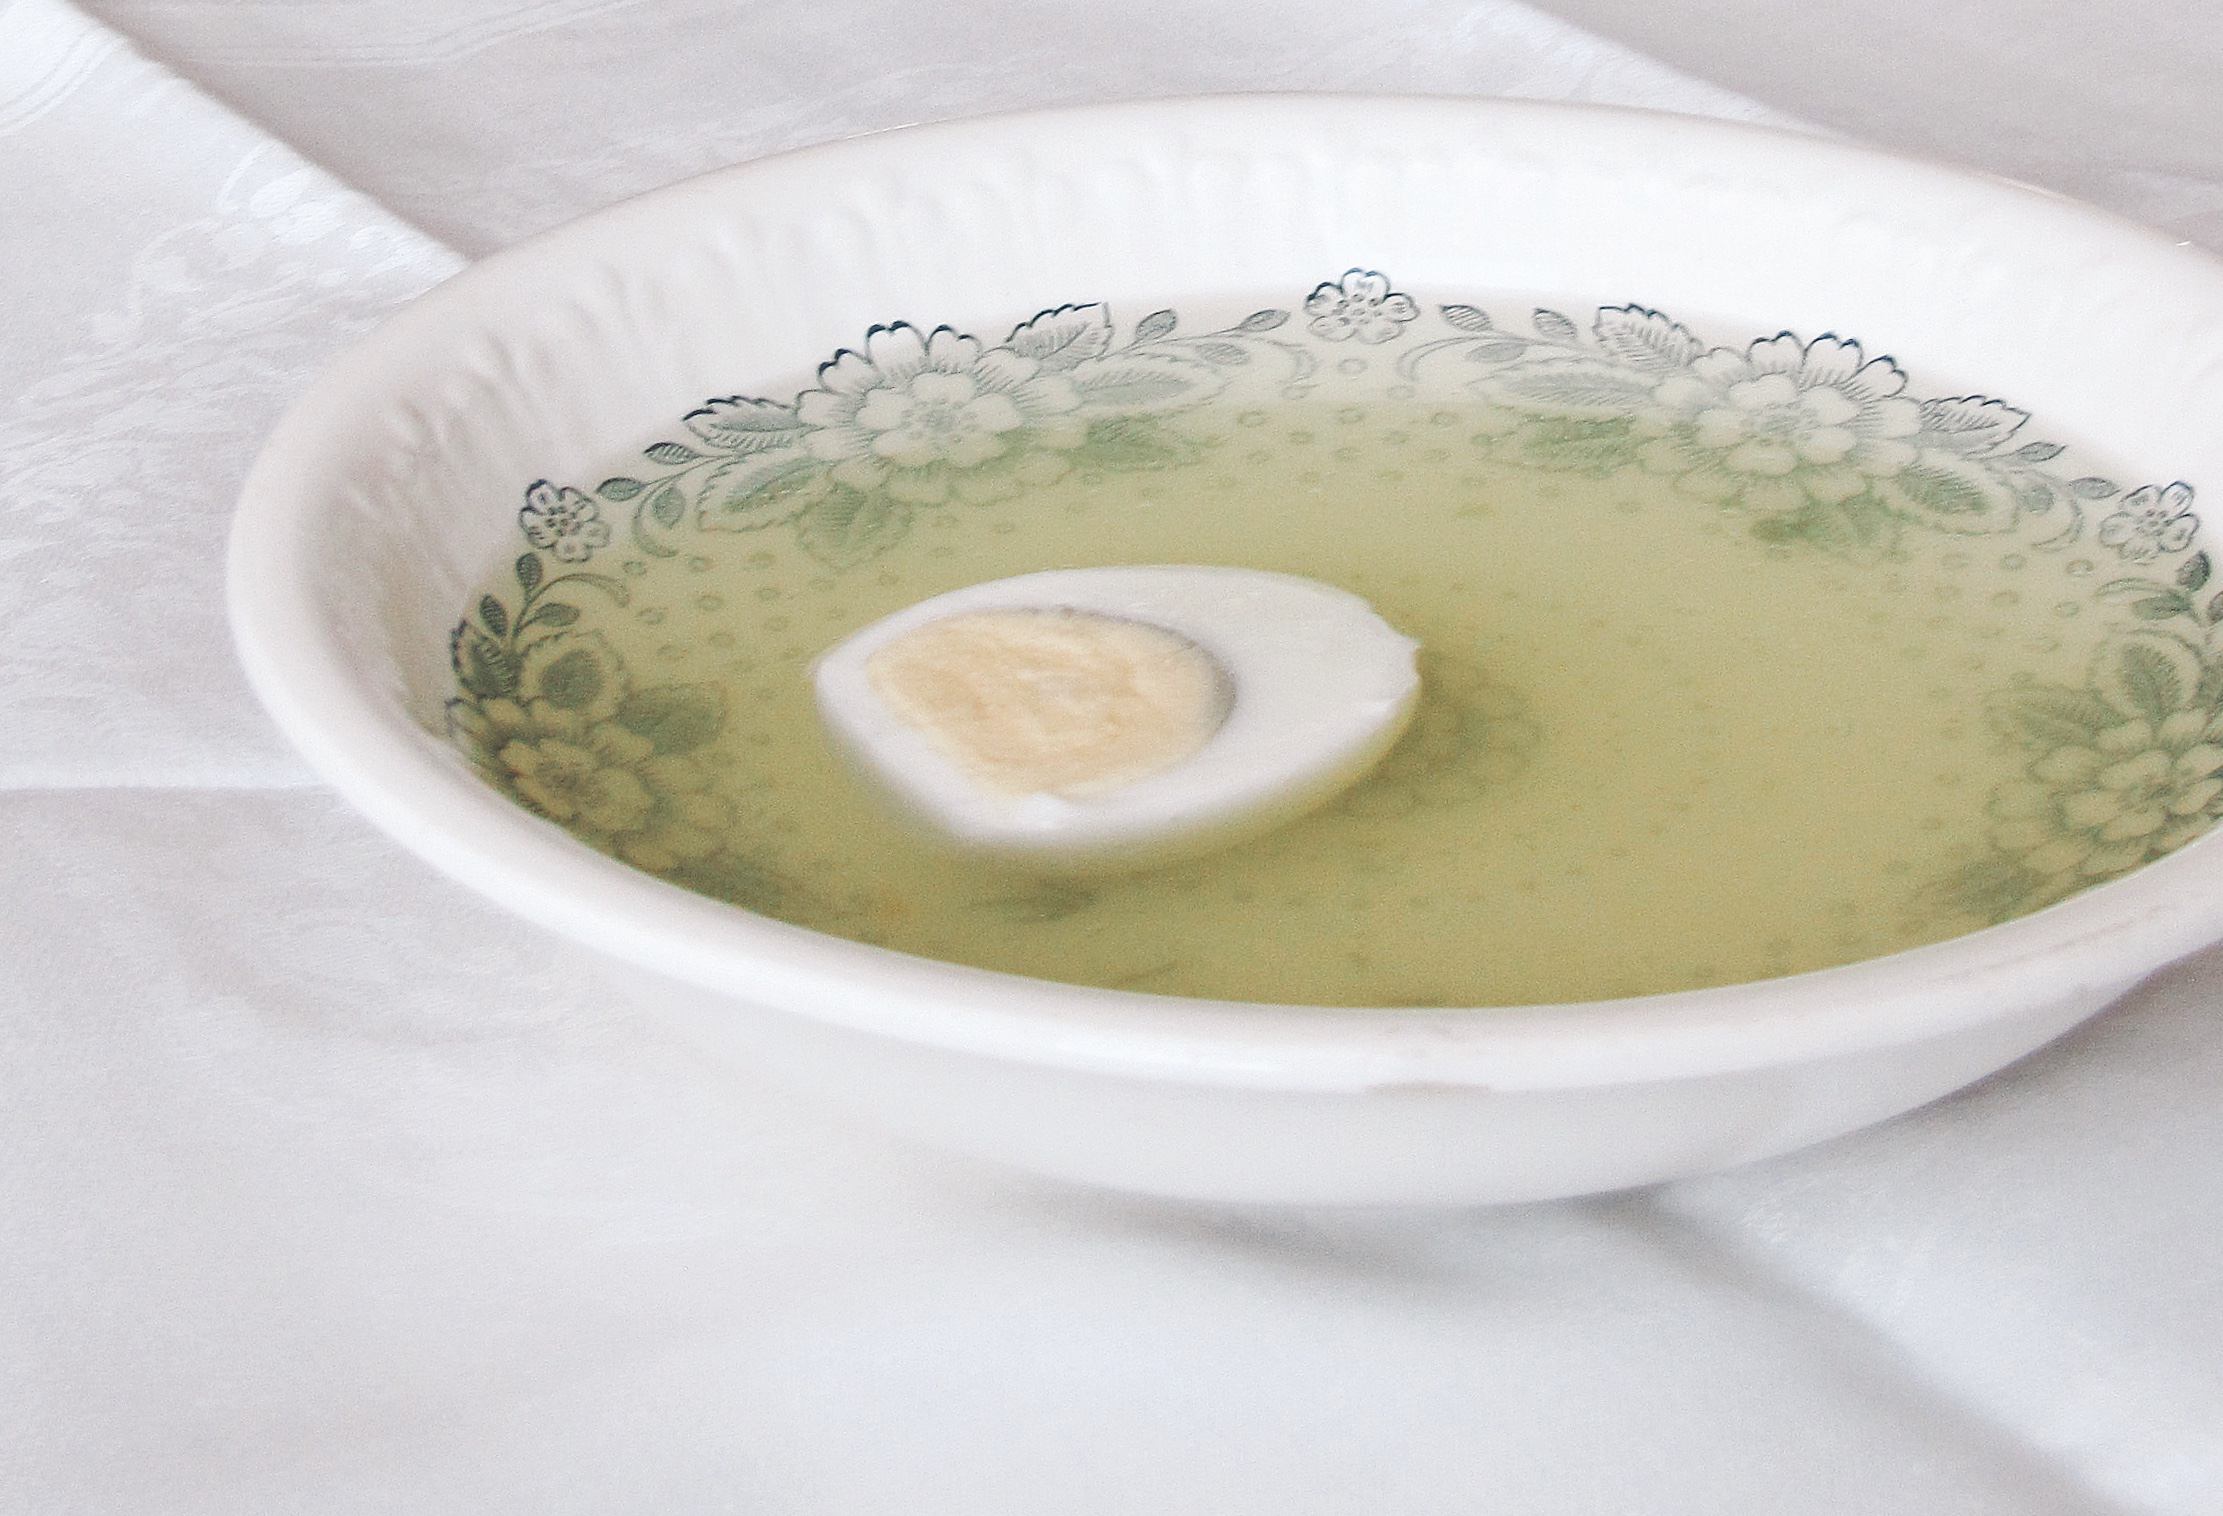 Broth with boiled egg